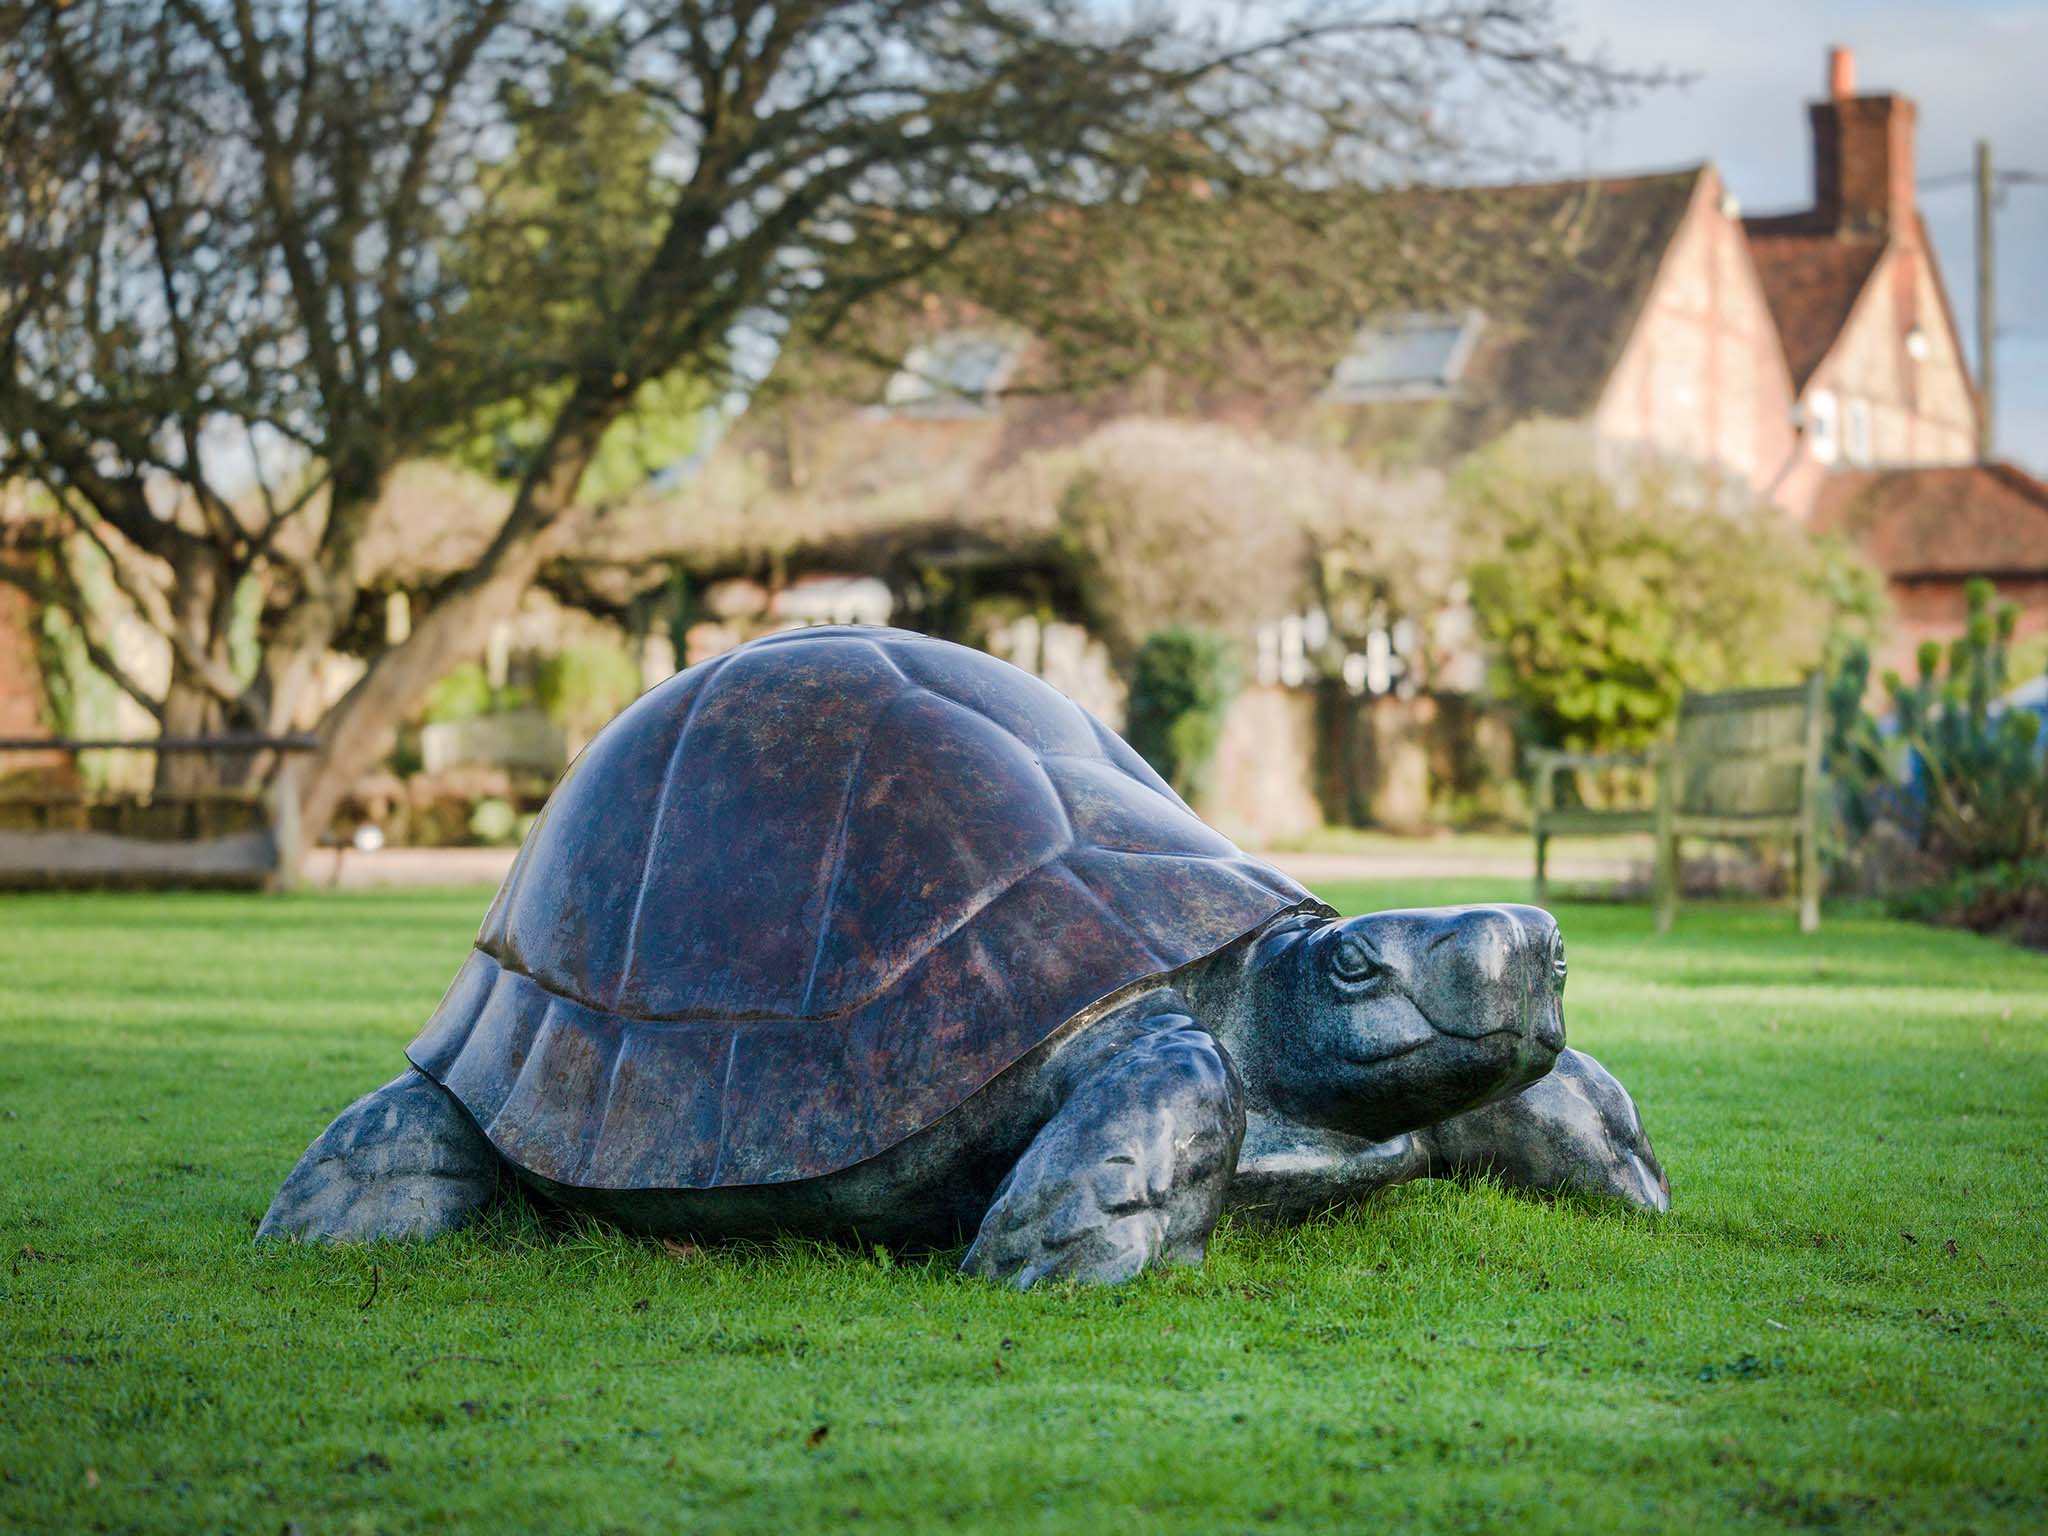 Sculpture of tortoise, by Michael Cooper.